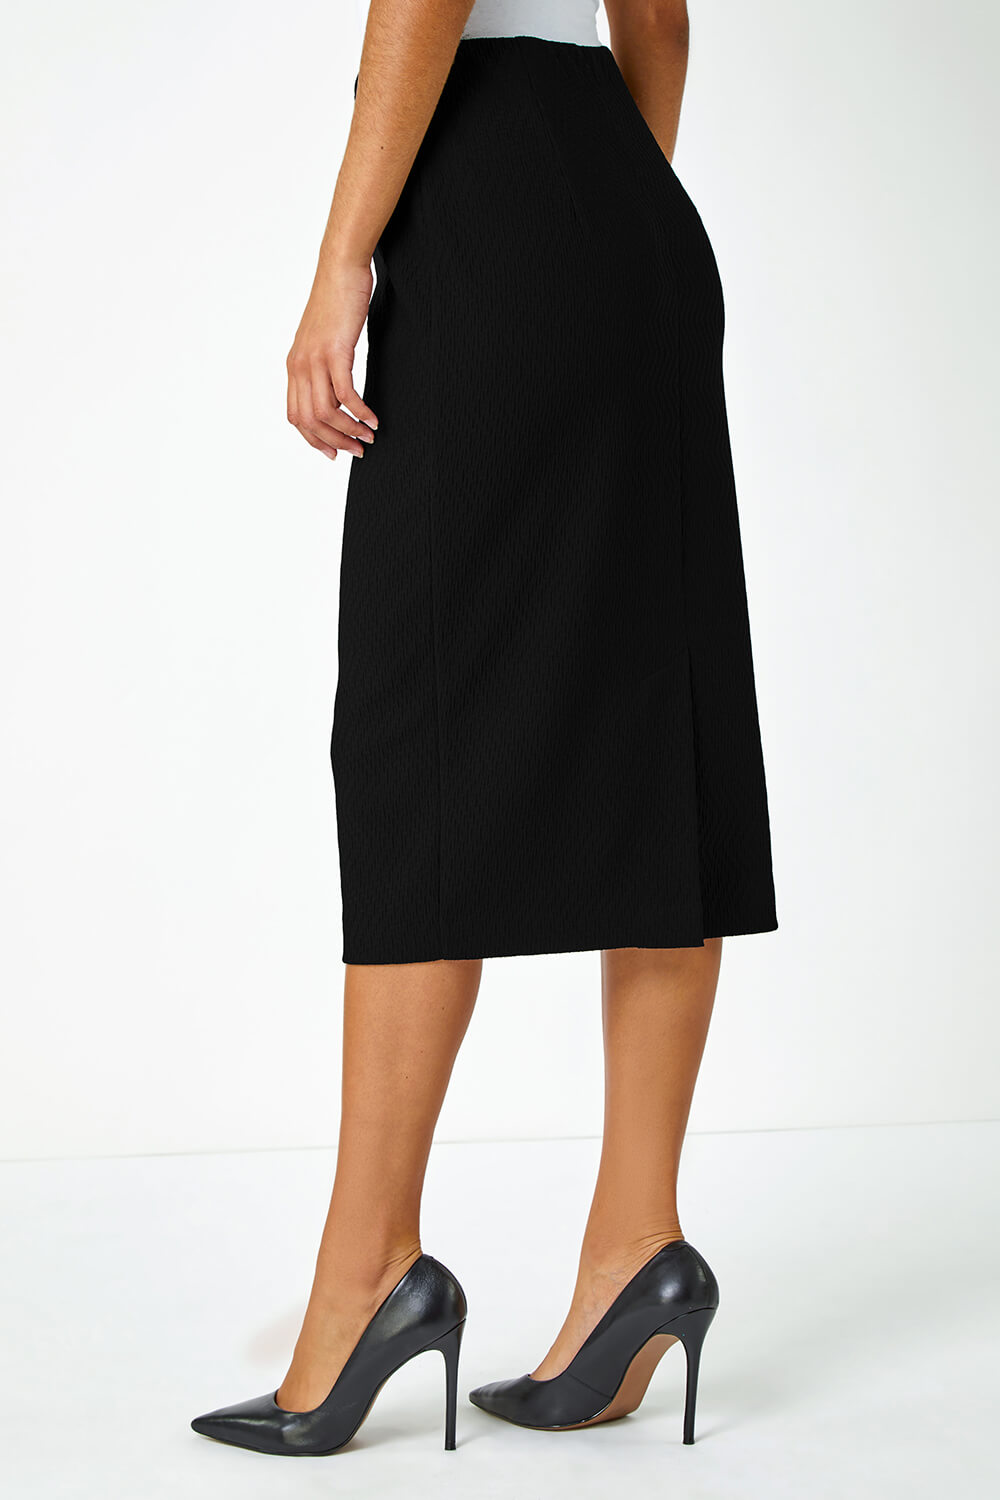 Black Stretch Jersey Textured Pencil Skirt, Image 2 of 6